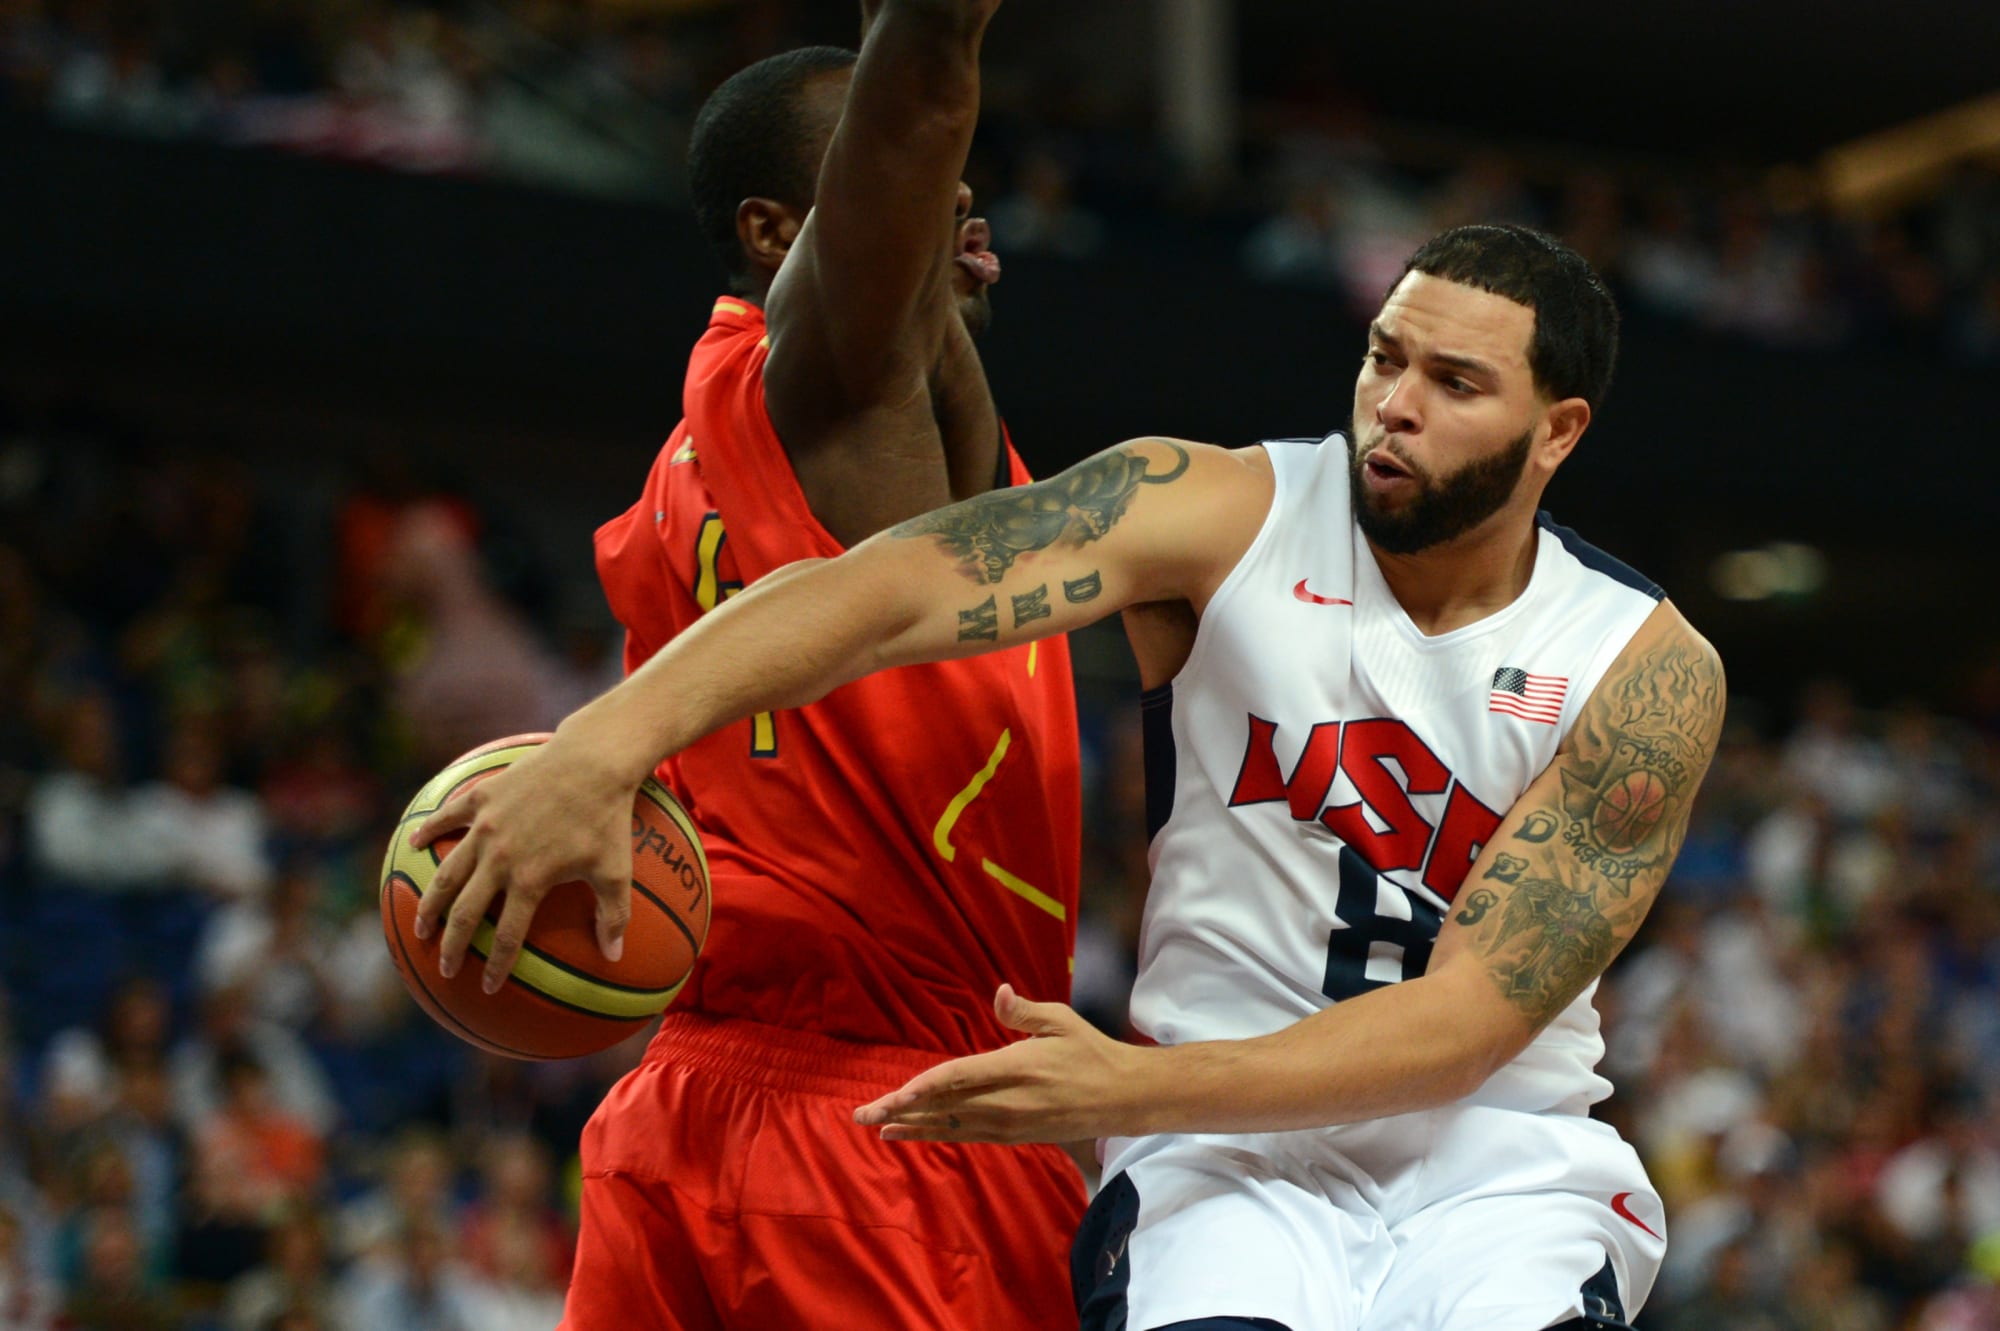 Deron Williams, ex-Illini hoops hero, still has a whole lot of fight left  in him - Chicago Sun-Times